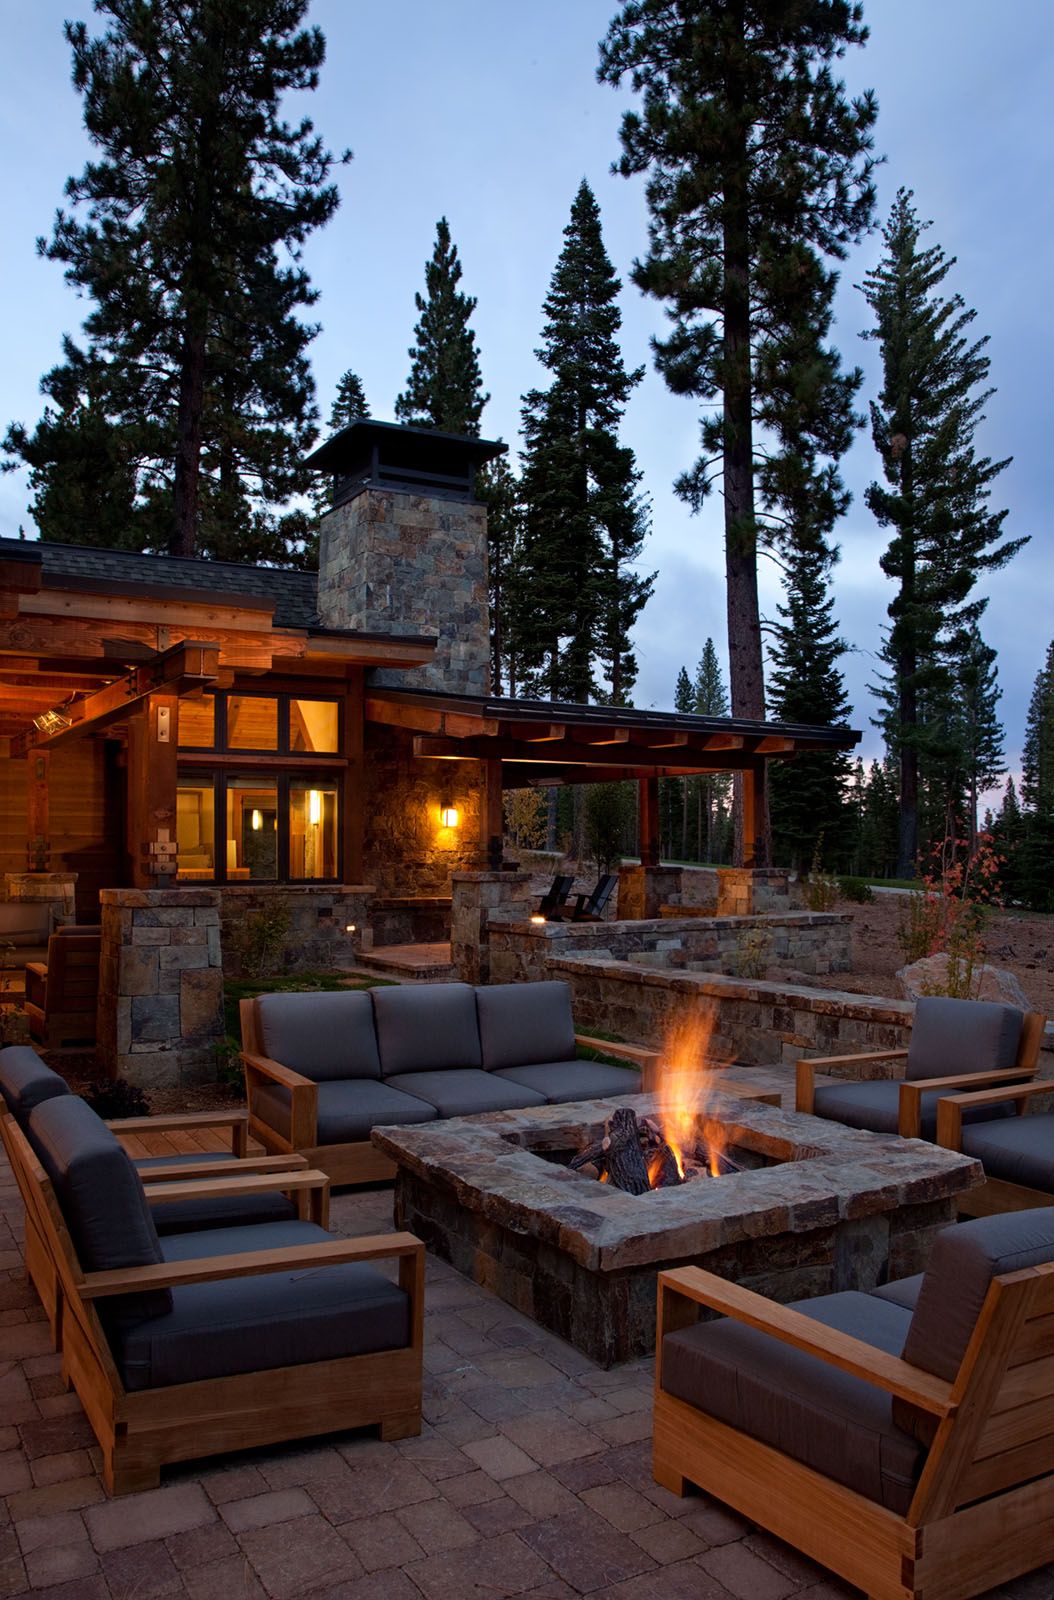 Georgetown Fireplace and Patios Beautiful California Rustic Home Fire Pit Want as Part Of the